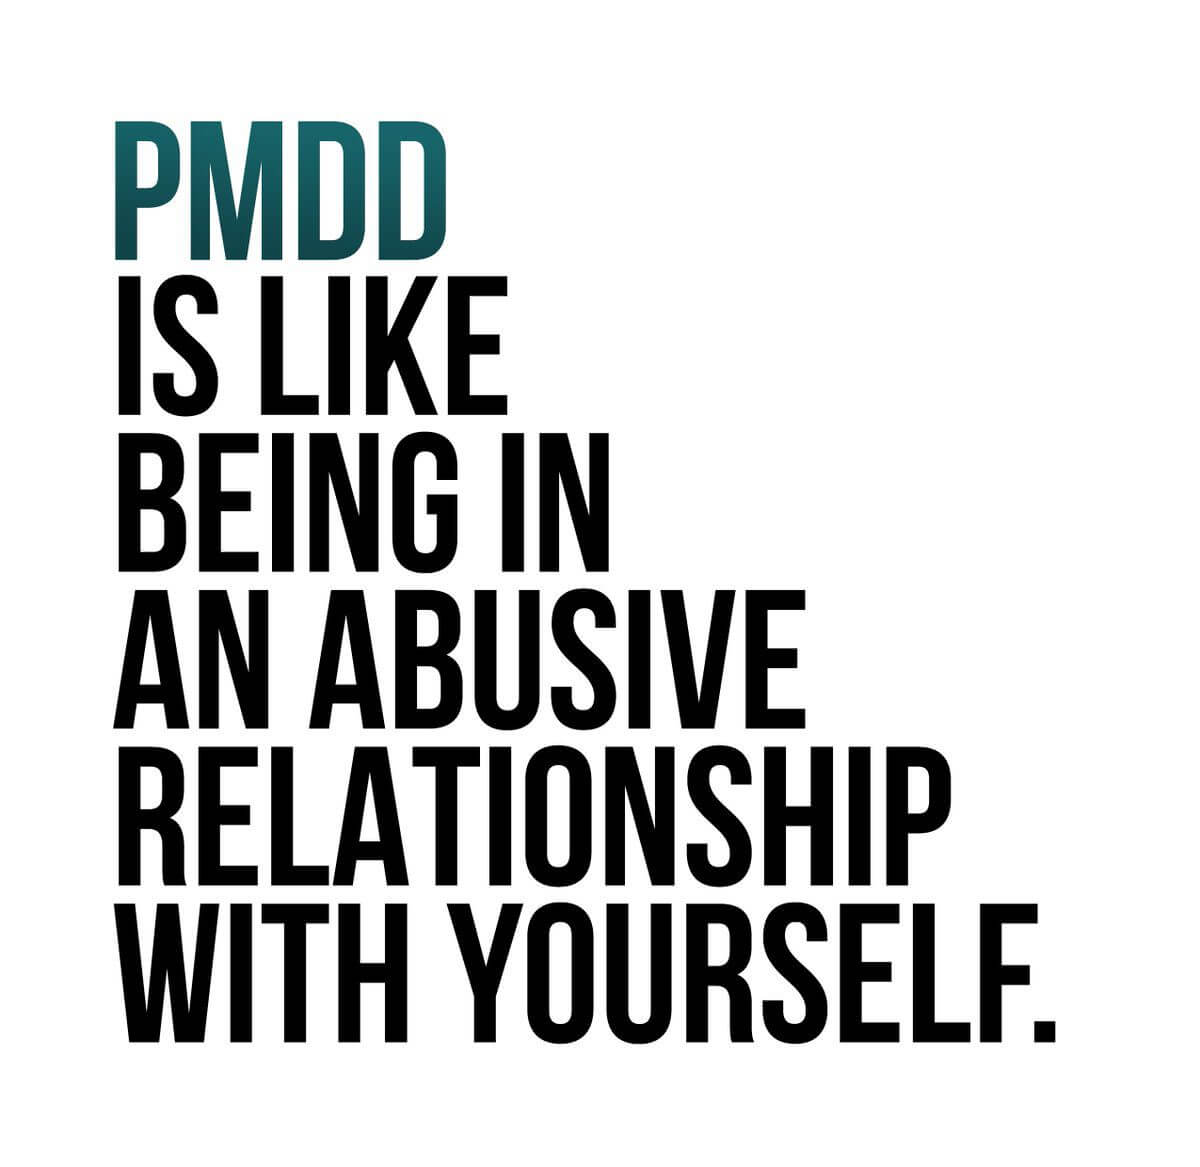 Running a business with PMDD